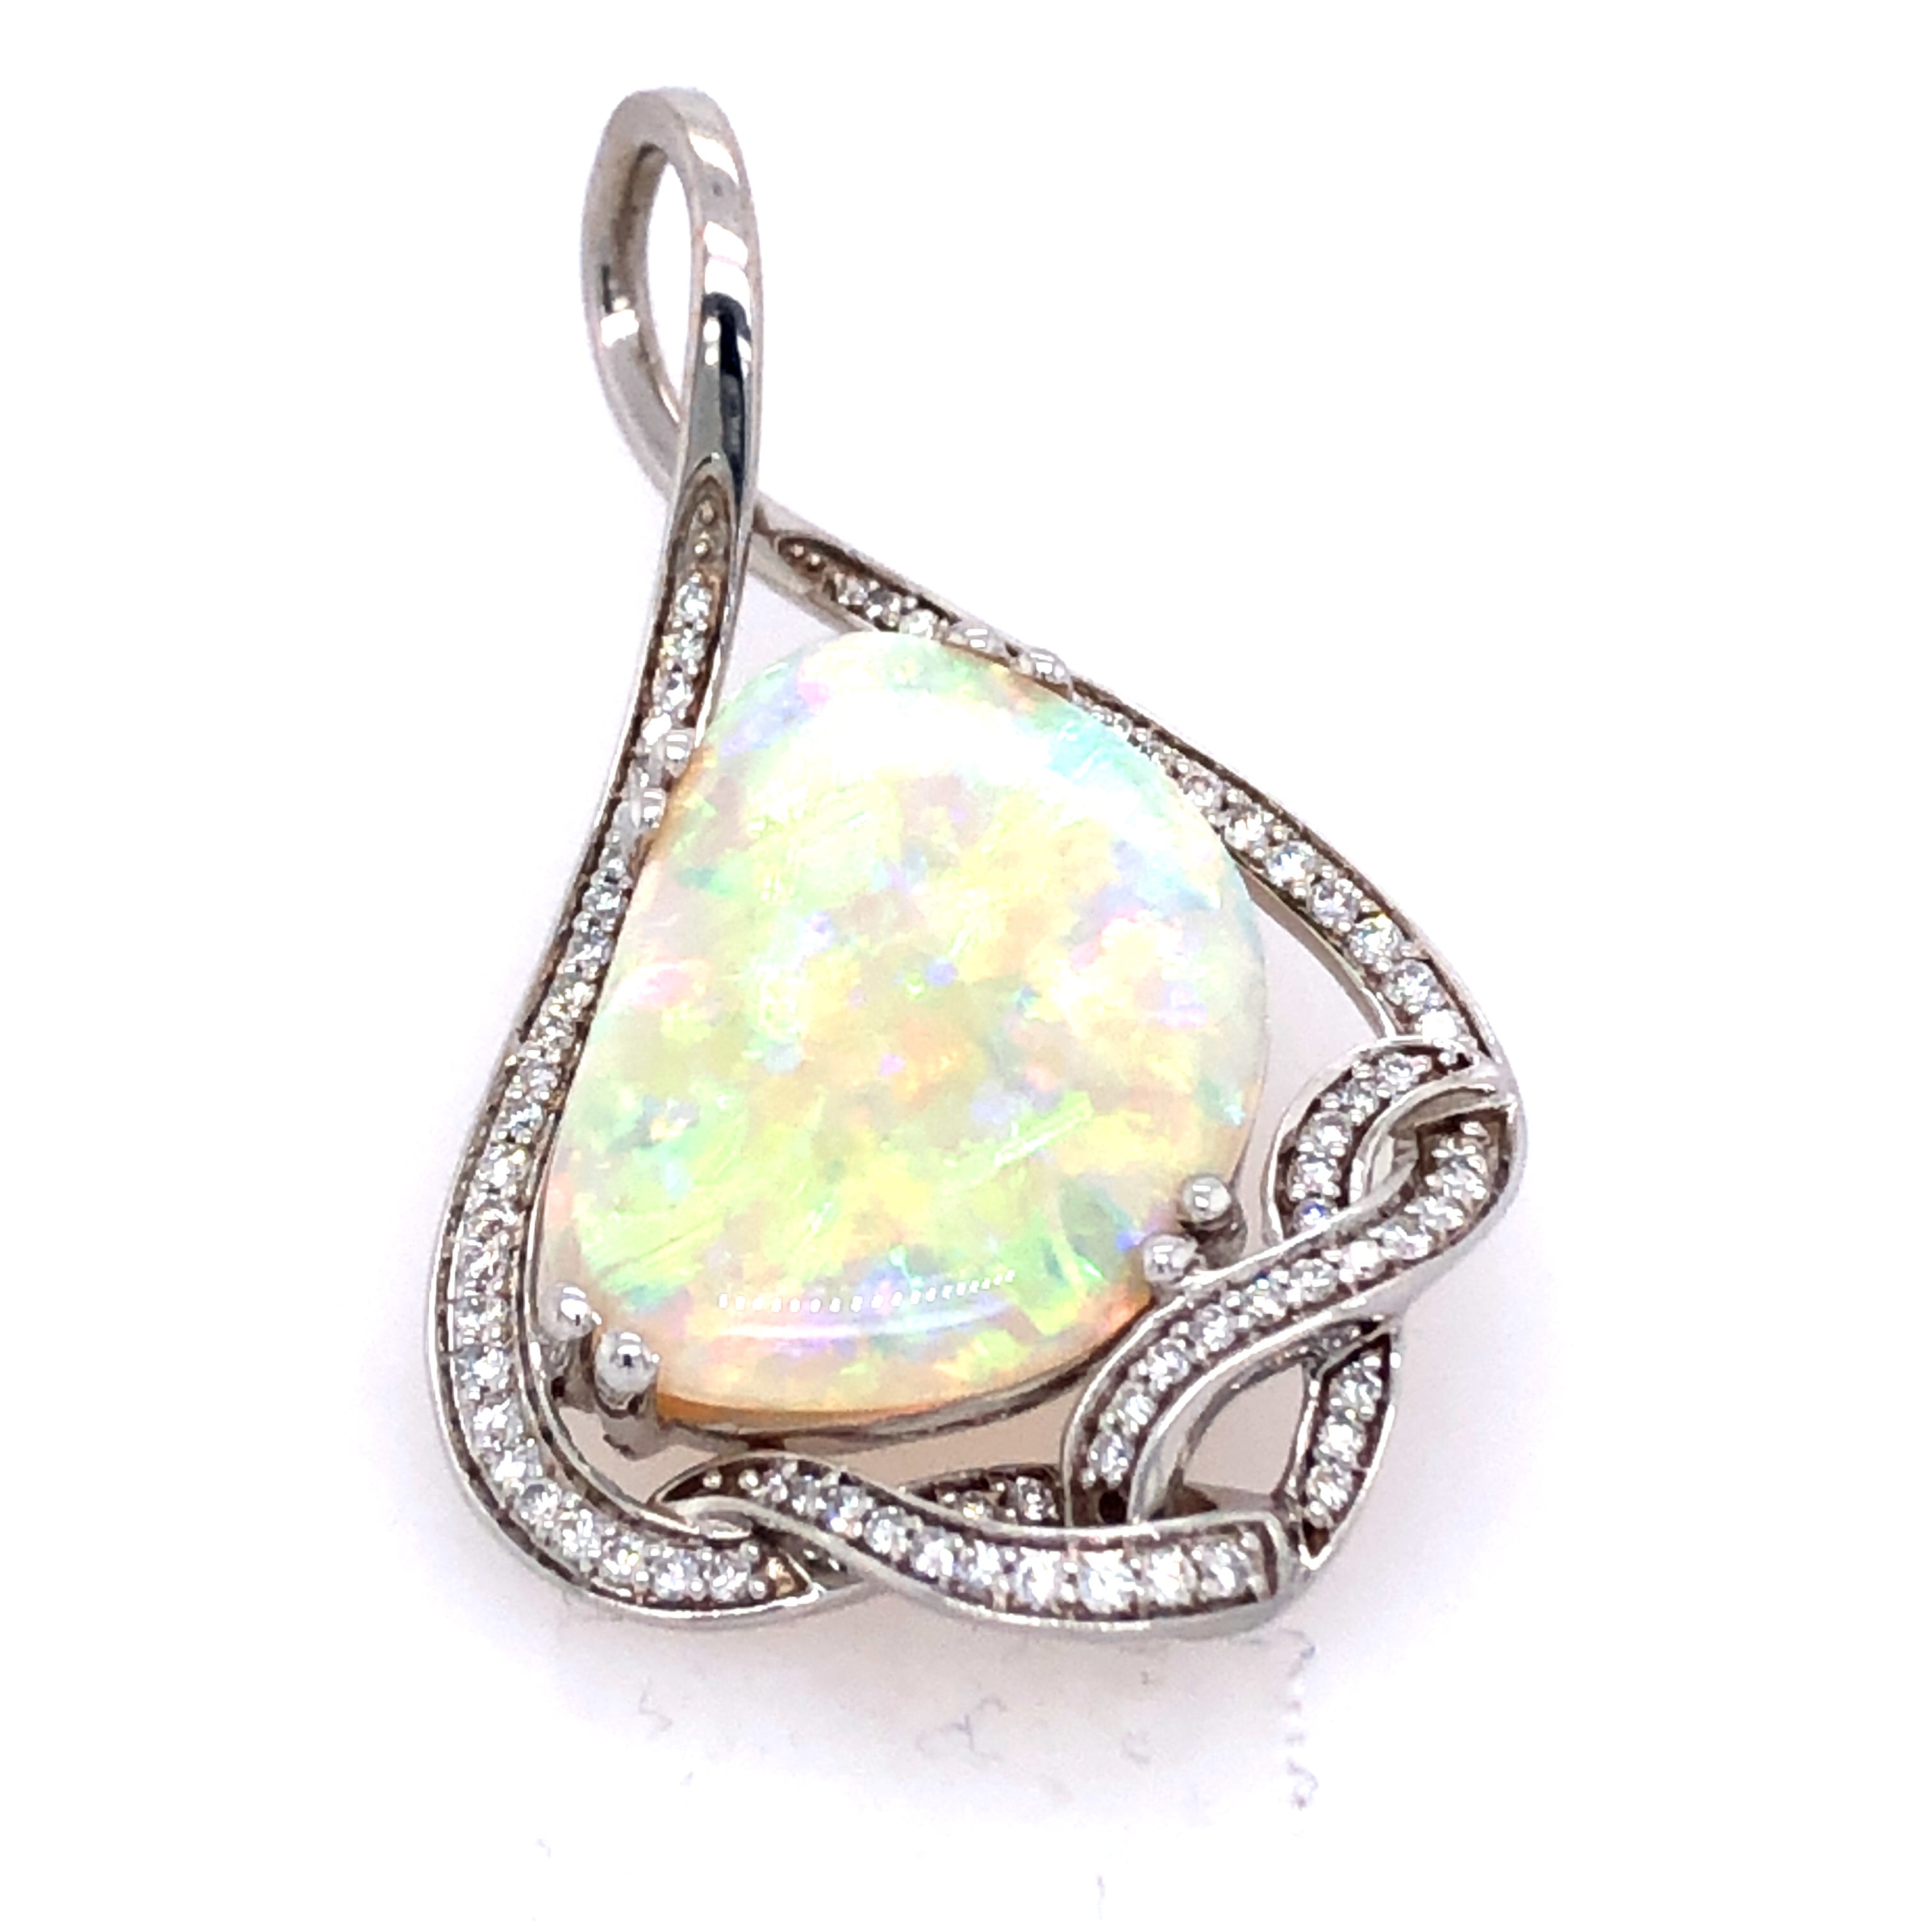 Statement Opal Necklace - Colored Stone Necklace